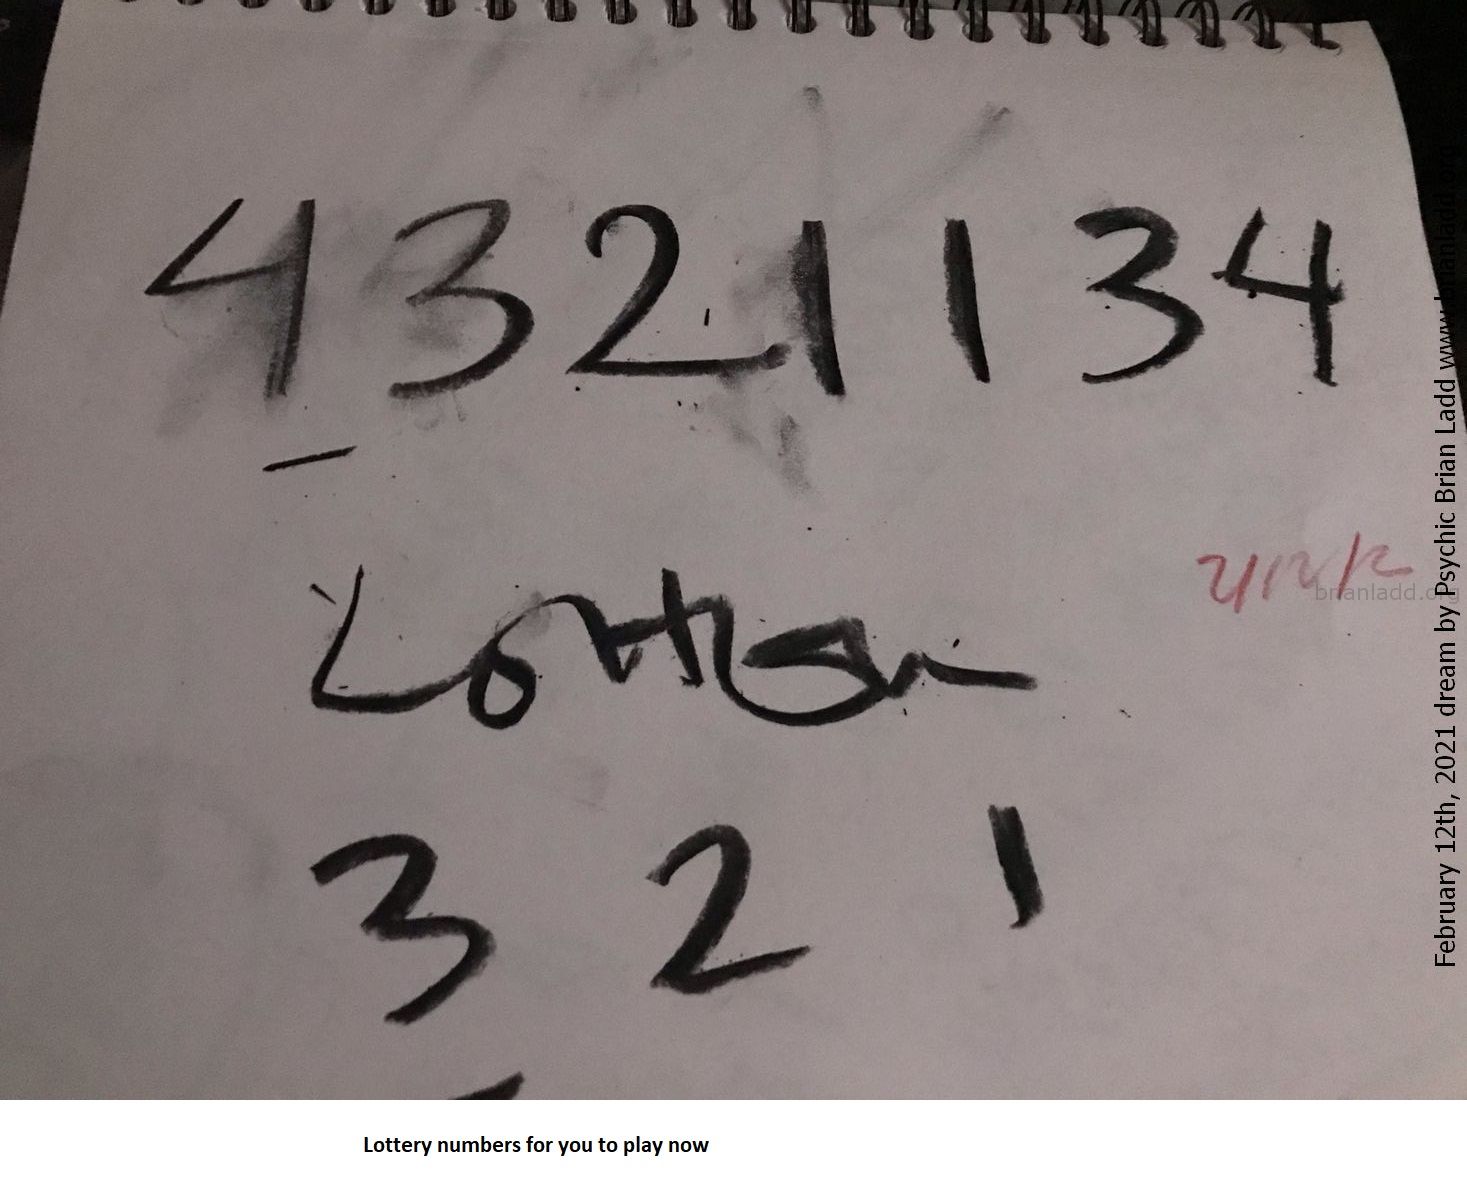 14452 12 February 2021 6 - Lottery Numbers For You To Play Now....
Lottery Numbers For You To Play Now.  ( NEW!  Free lottery picks by mail, I will personally fill out your blank lottery sheet and mail it back to you for free, postage is included!  visit  https://briansprediction.com/picksbymail   )
